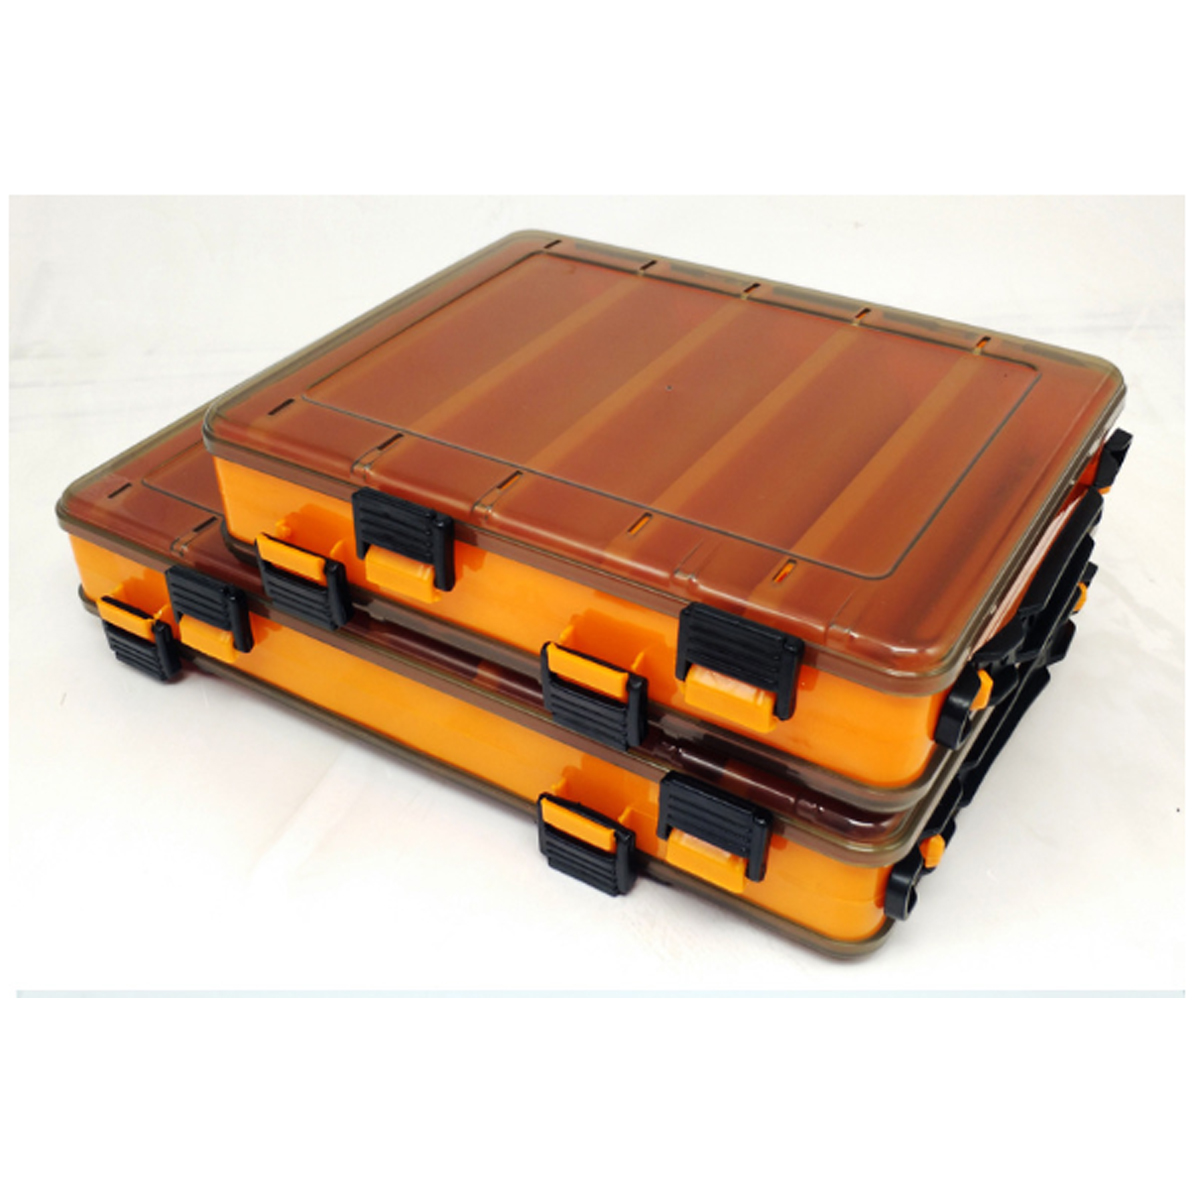 ZANLURE-Fishing-Box-Double-Sided-Fishing-Lure-Pesca-Accessories-Bait-Lure-Case-Box-Container-1552970-4